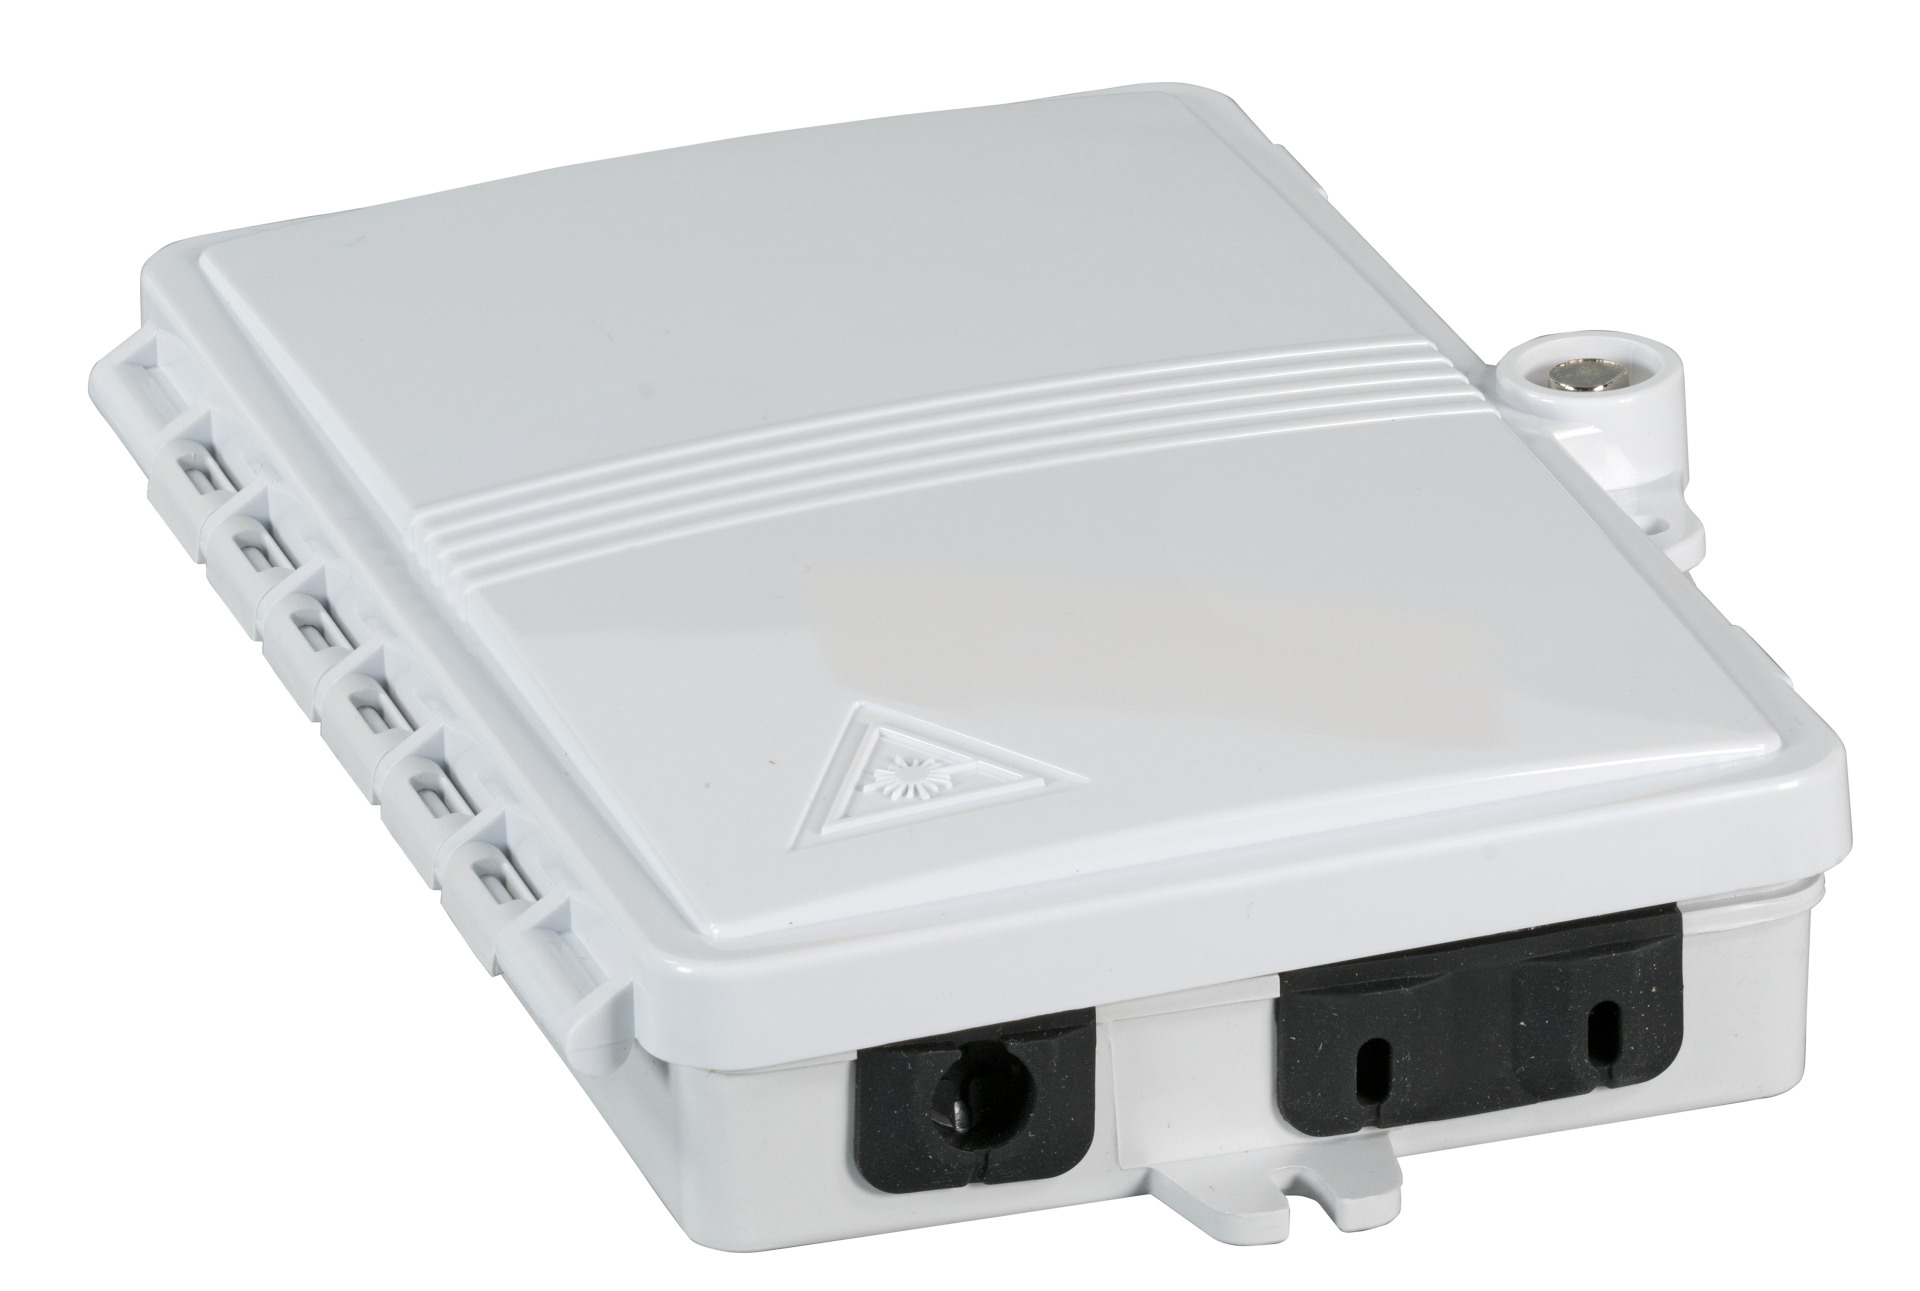 FTTH IP65 Connectionbox for 4fiber, 2adapter and Fiber overlength box